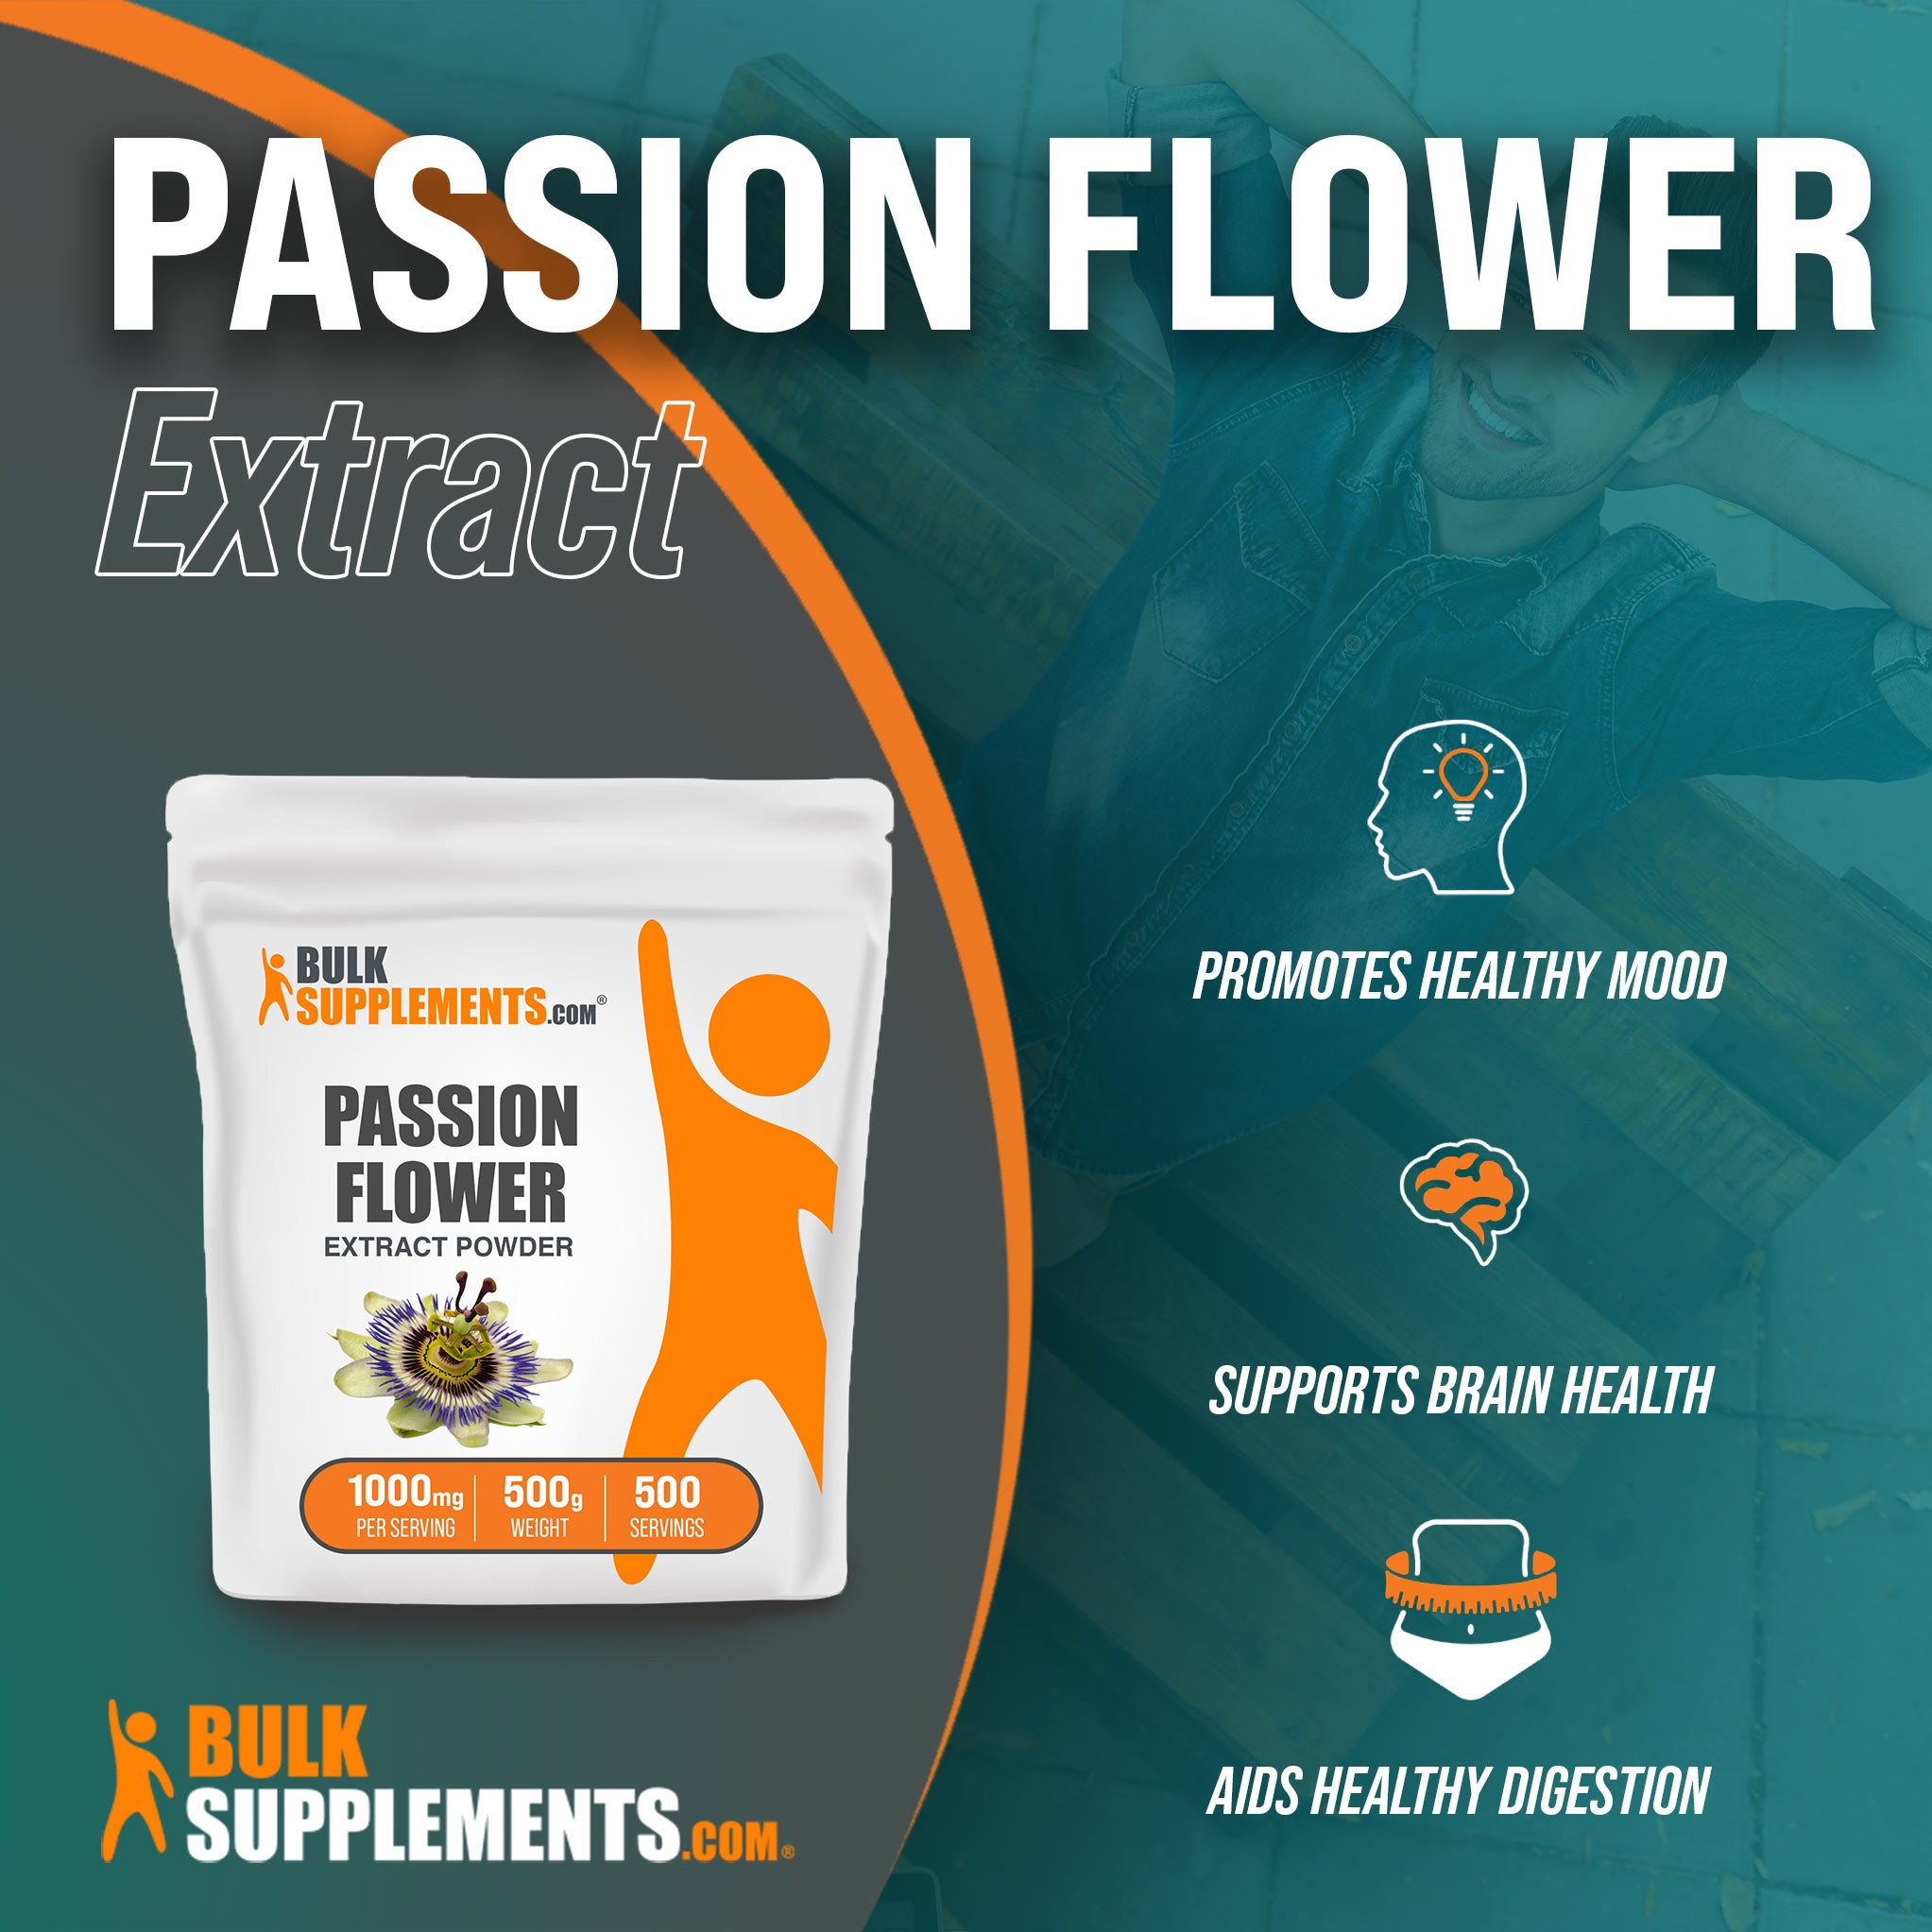 Benefits of Passion Flower Extract: promotes healthy mood, supports brain health, aids healthy digestion